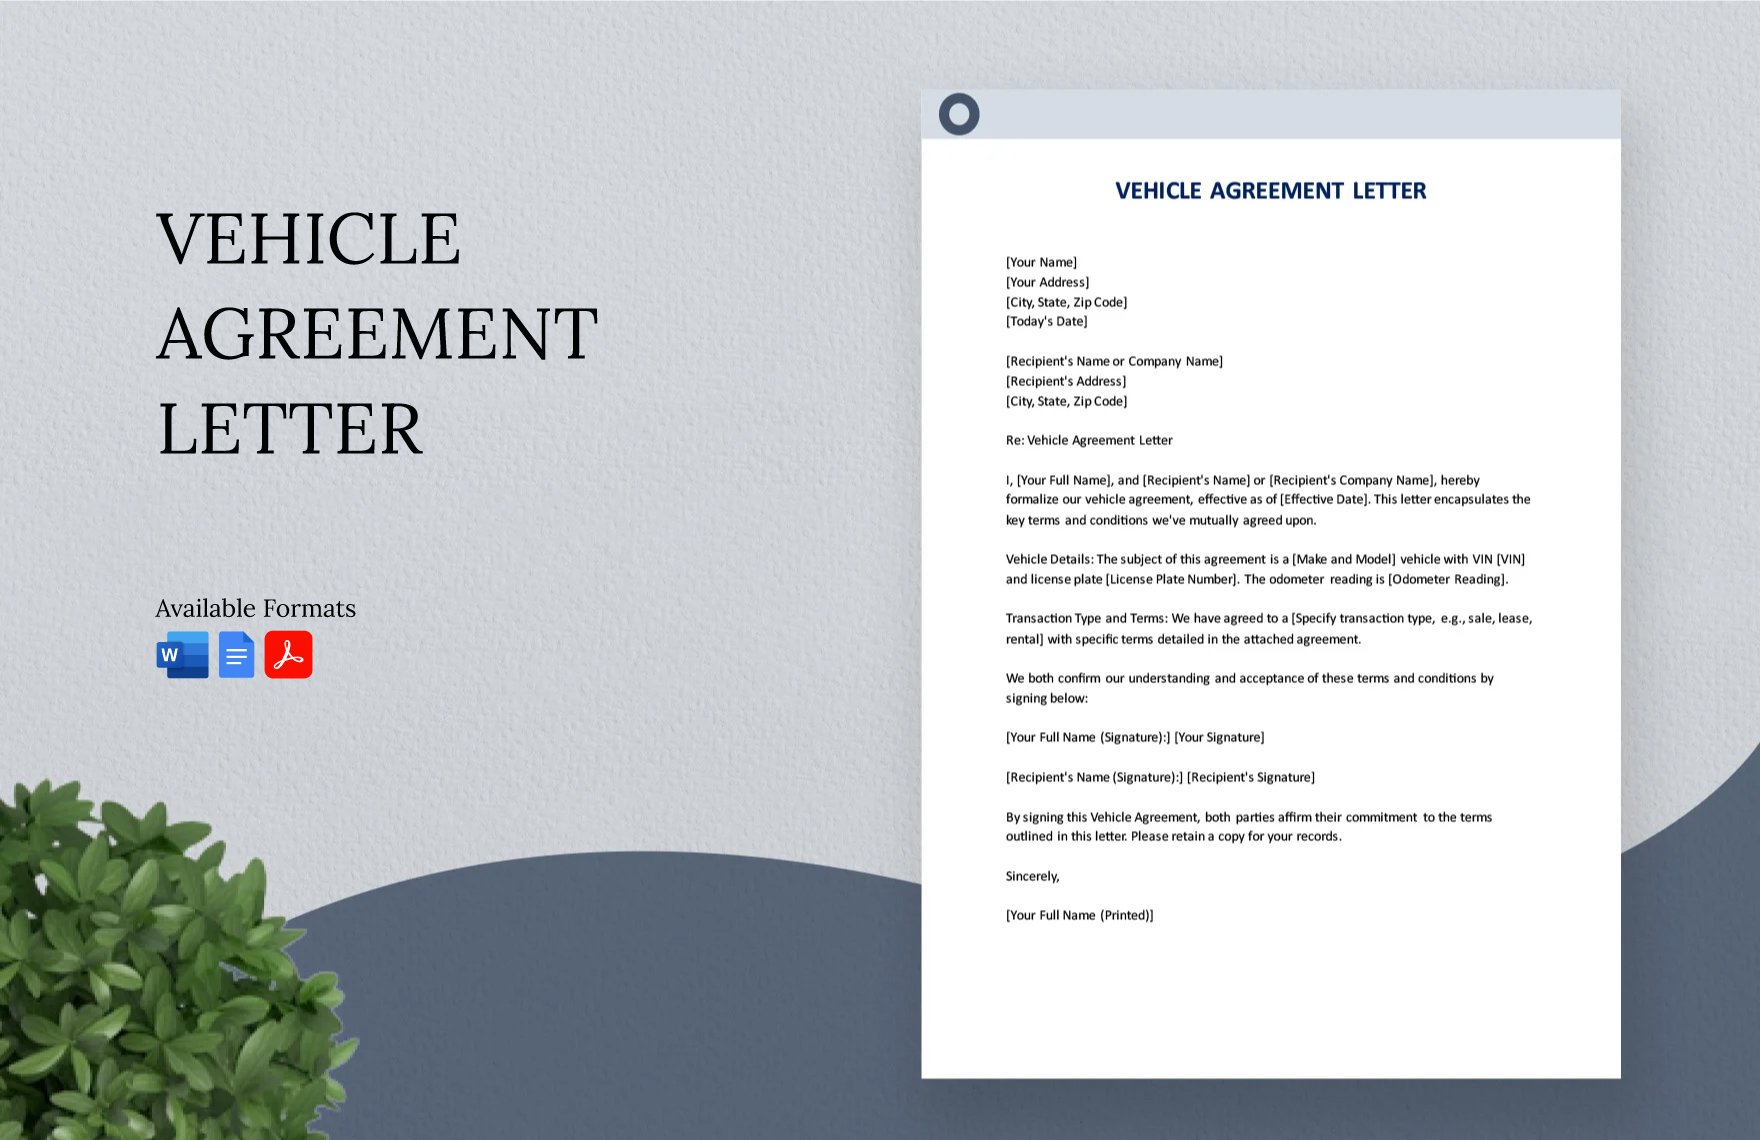 Vehicle Agreement Letter